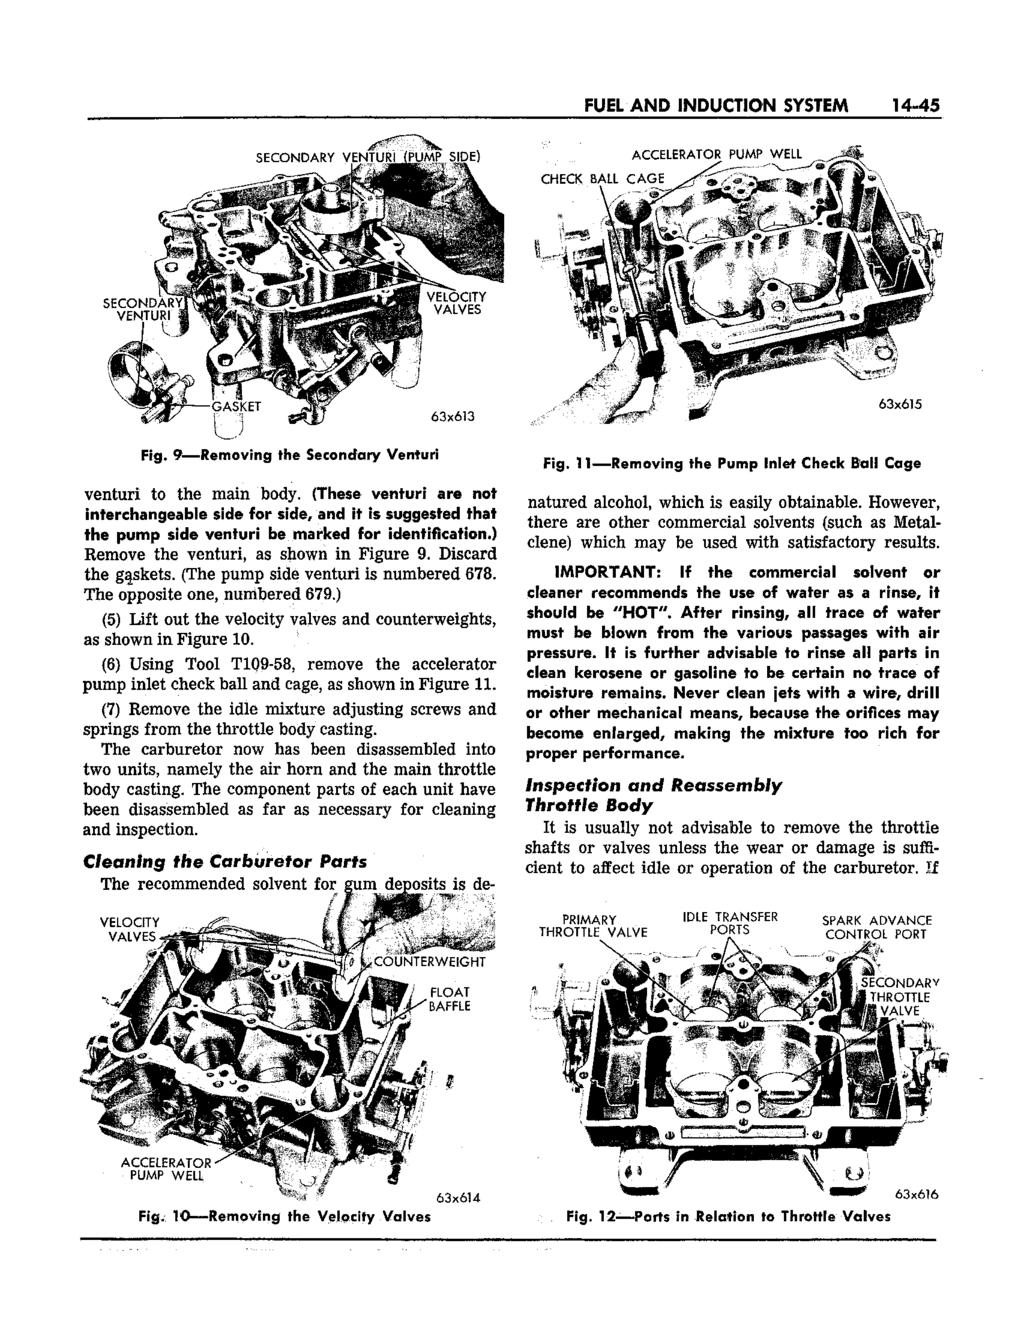 FUEL AND INDUCTION SYSTEM 14-45 Fig. 9 Removing the Secondary Venturi venturi to the main body.